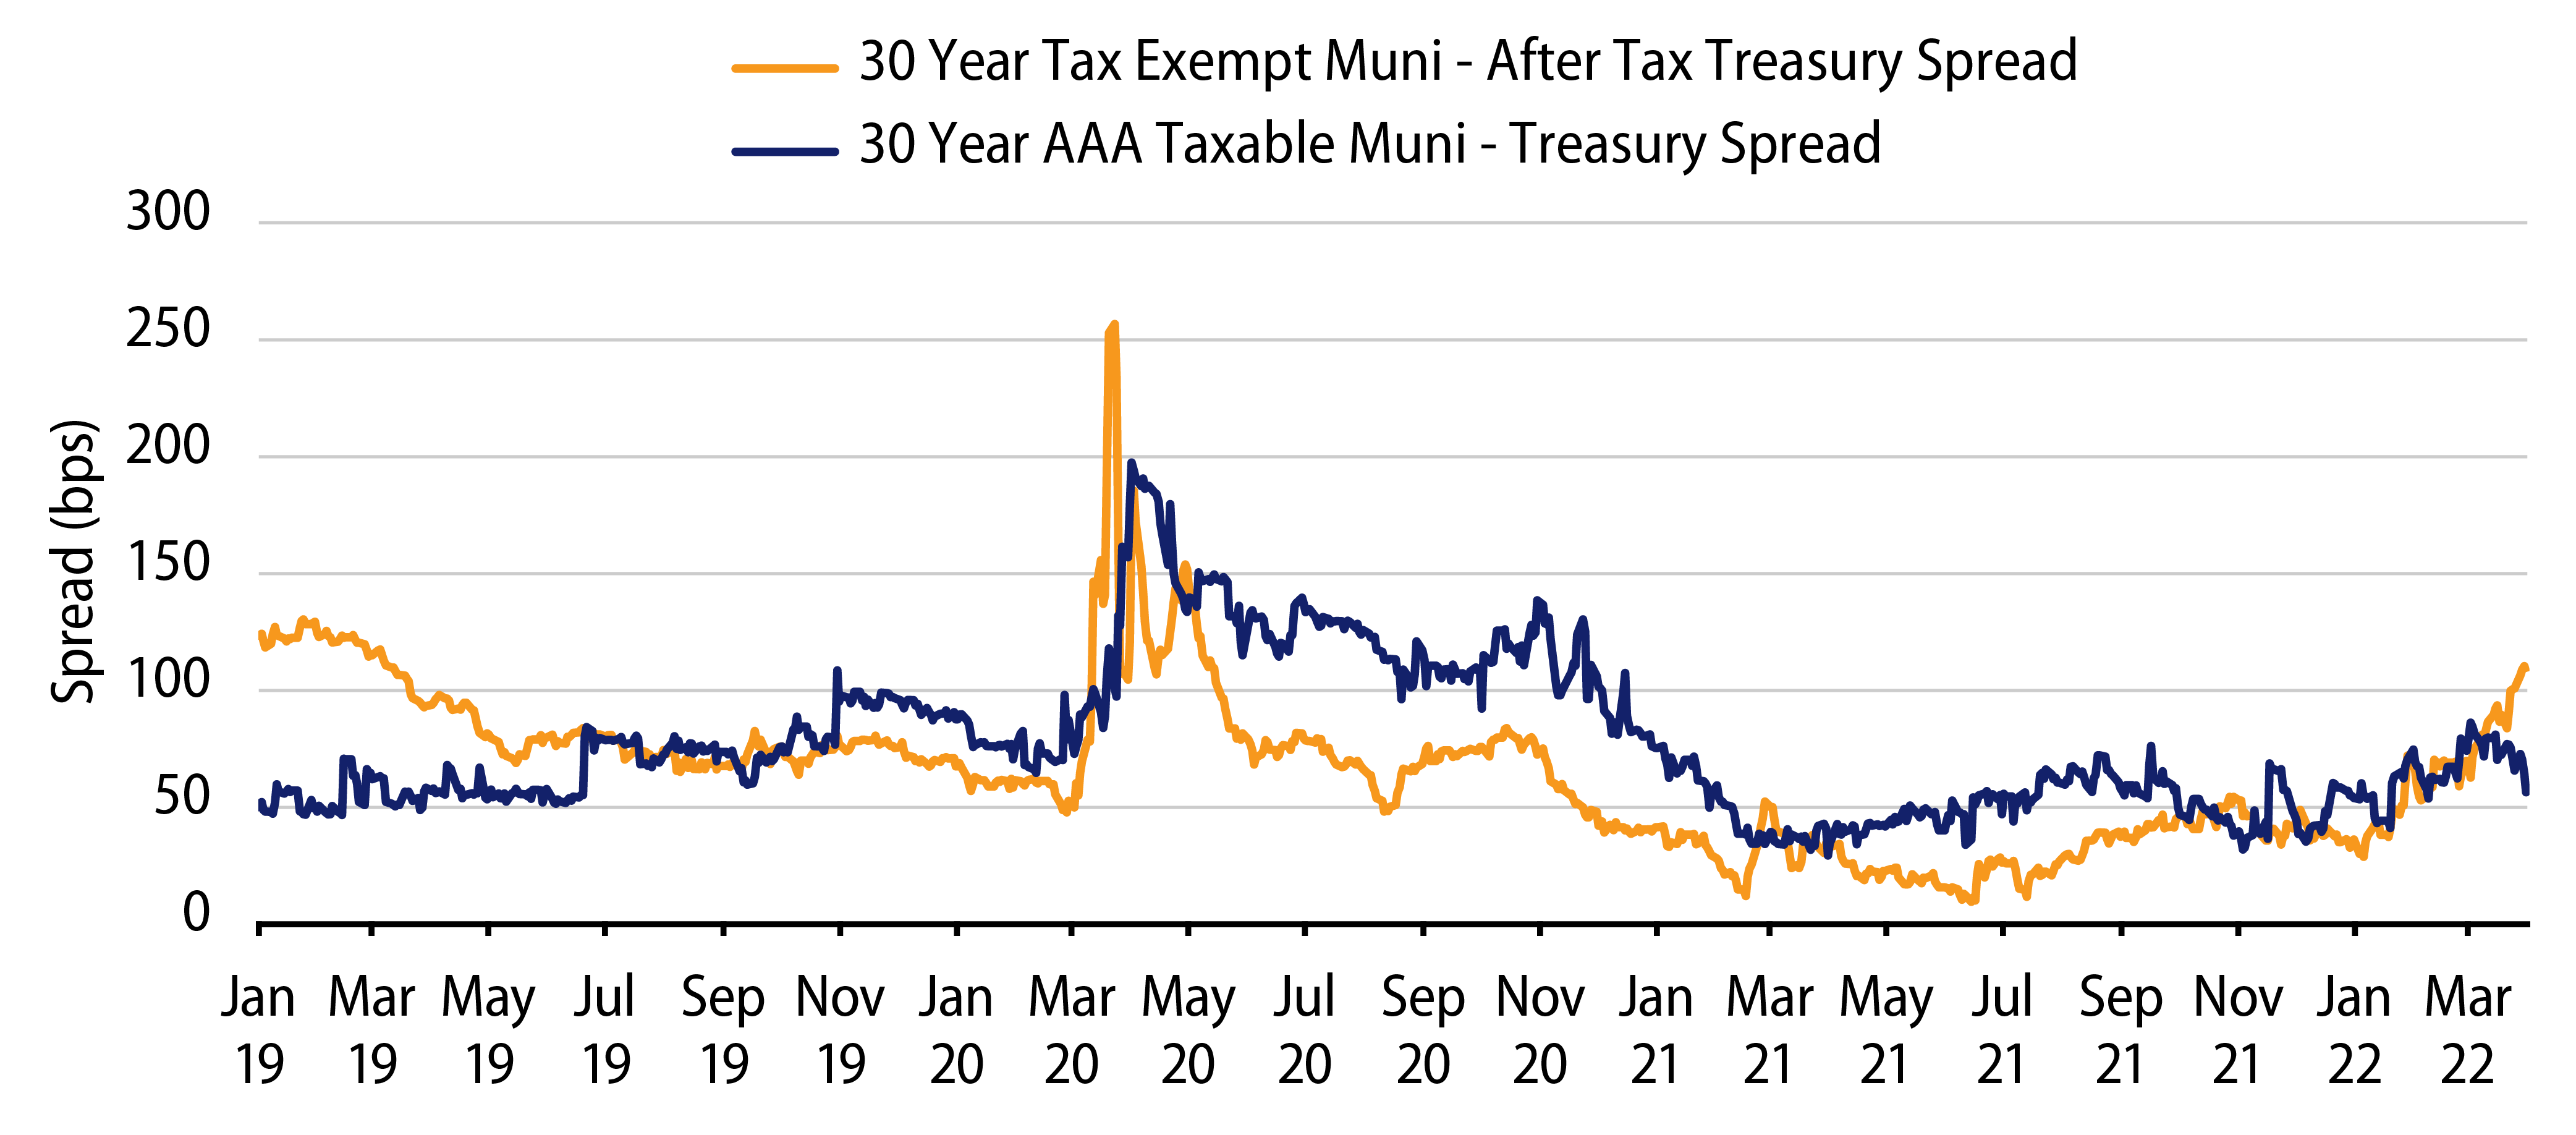 Explore Tax-Exempt and Taxable Municipal Spreads to Treasuries